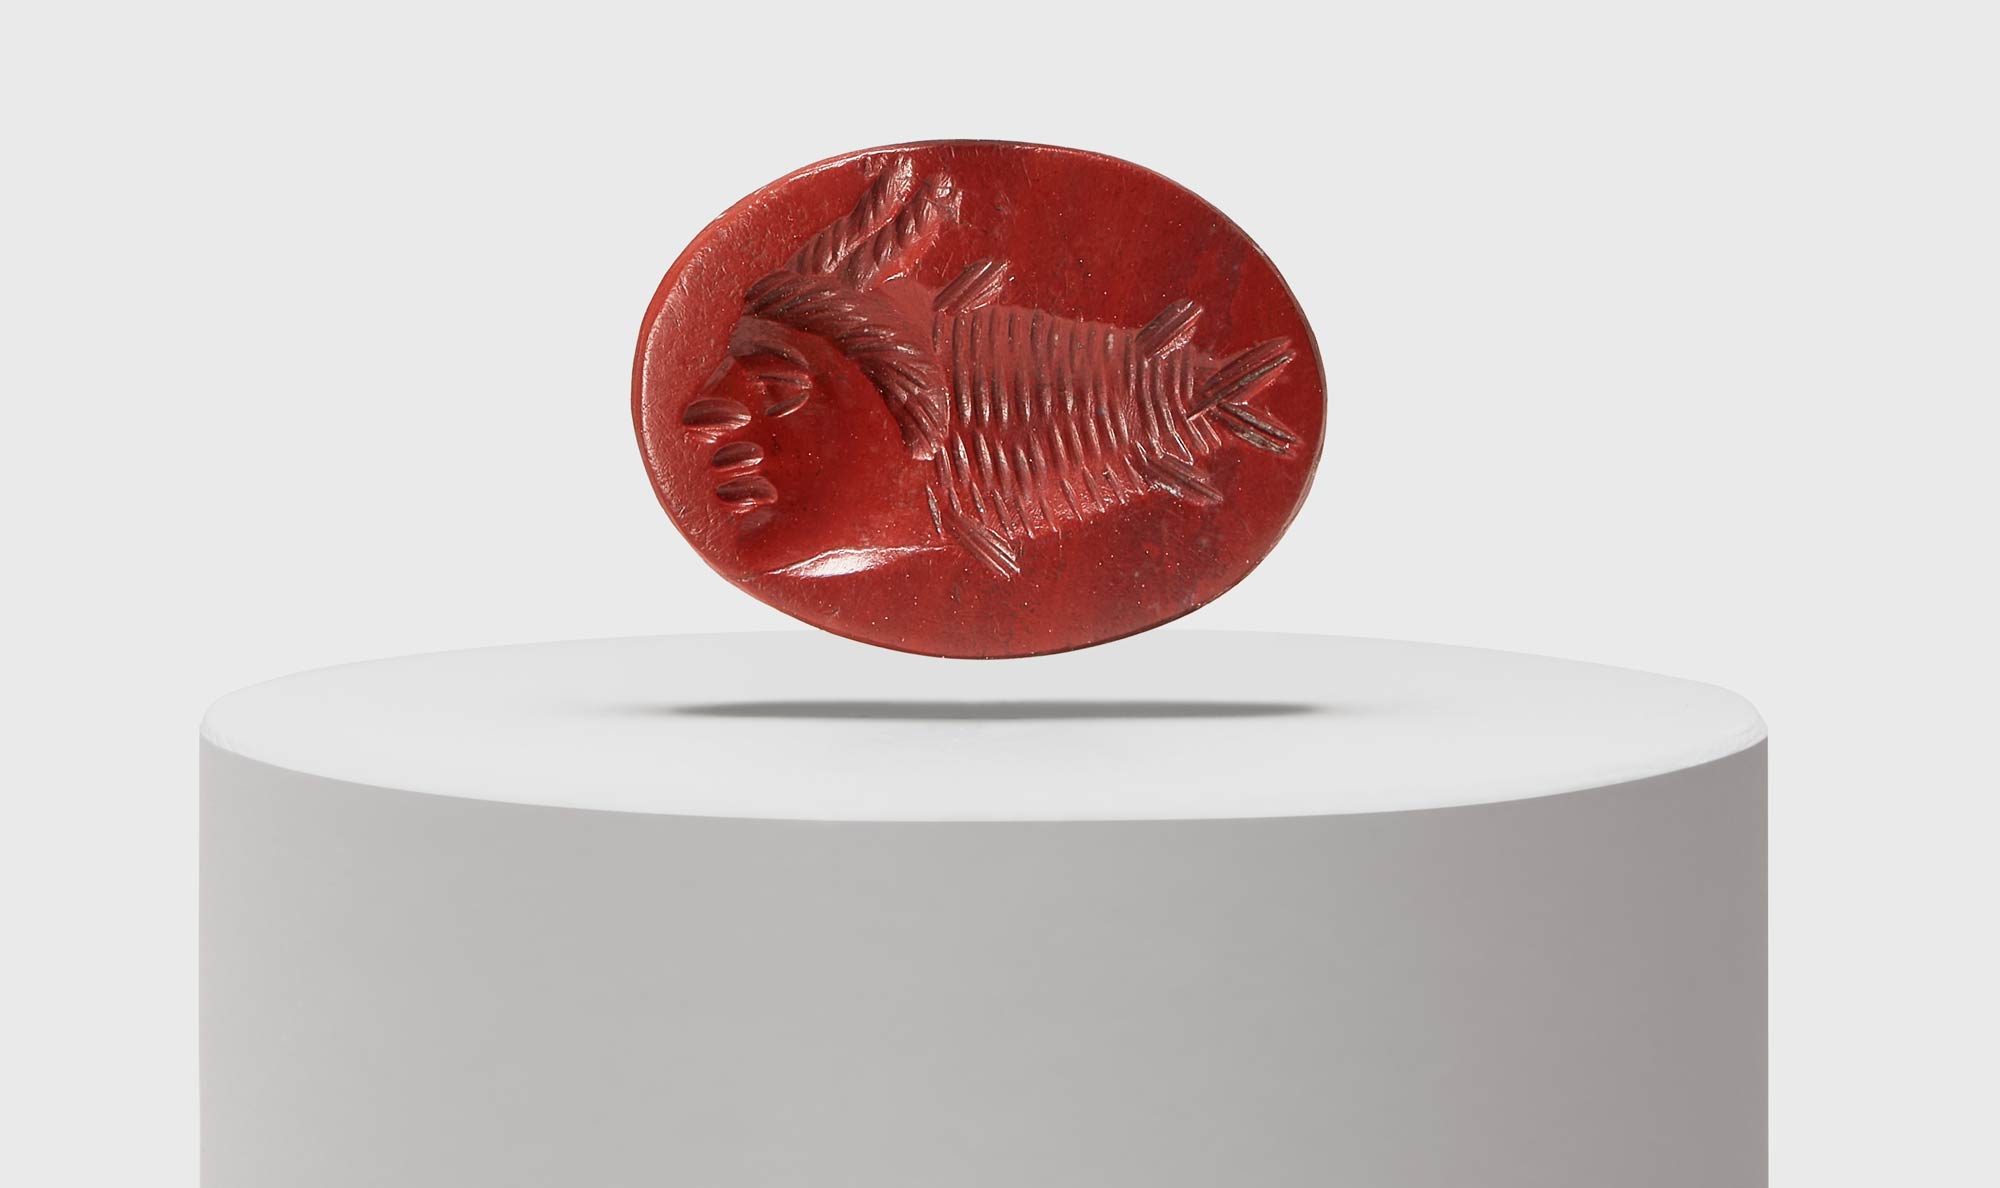 Roman art, Gem with gryllos composed of fish and human face (2nd century AD; red jasper; Aquileia, National Museum). Photo by Slowphoto, MAN Aquileia archives.